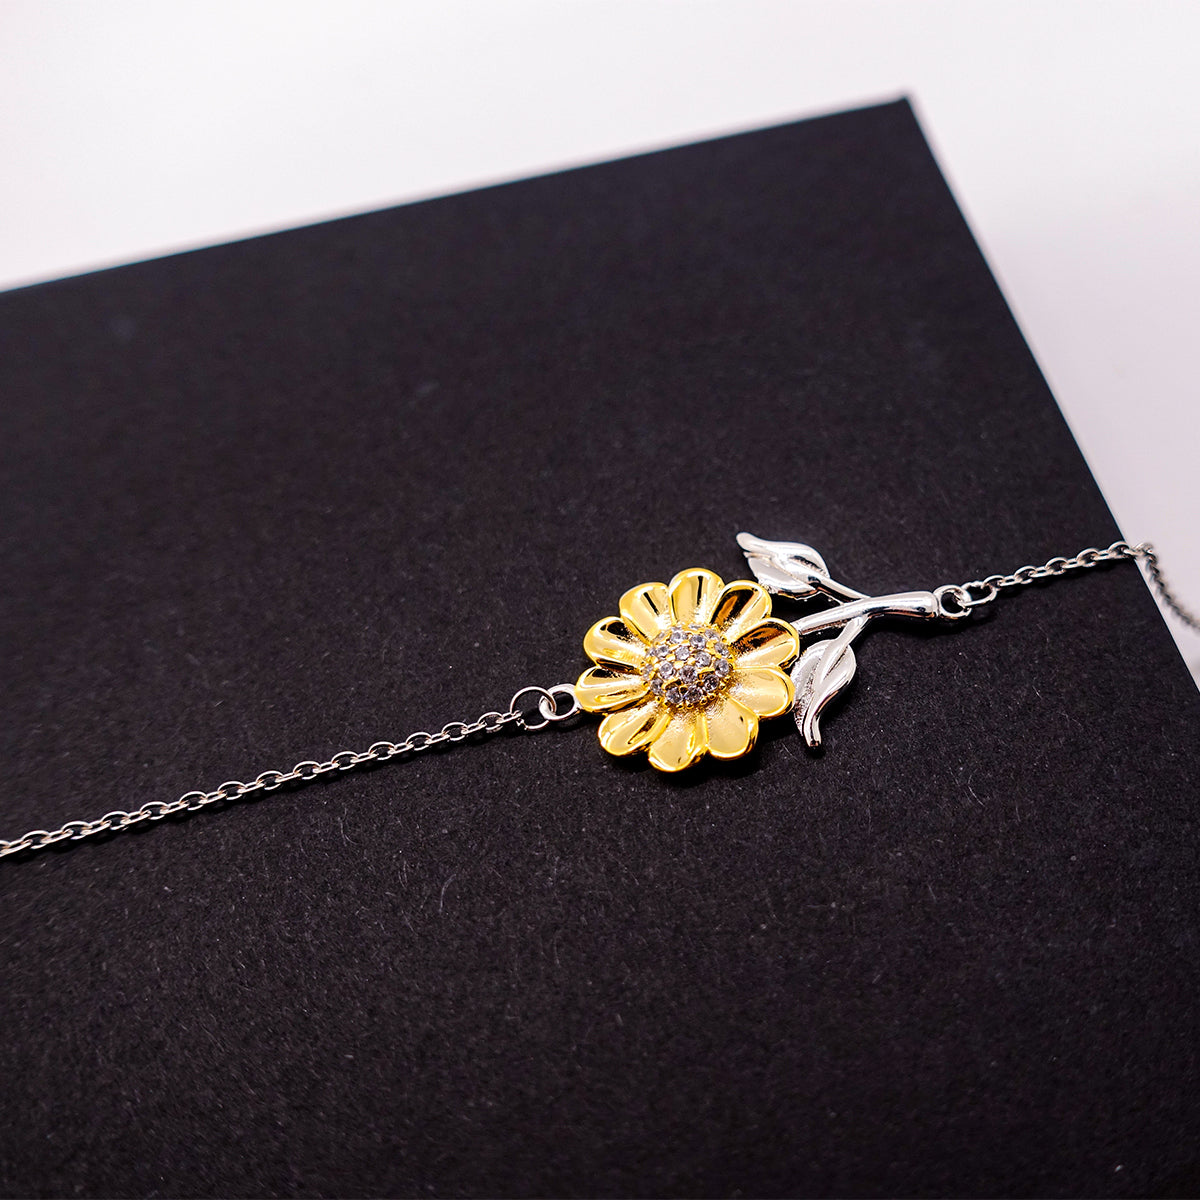 Husband Sunflower Bracelet You will always have a special place in my heart Inspirational Gift for Him on Birthday or Christmas